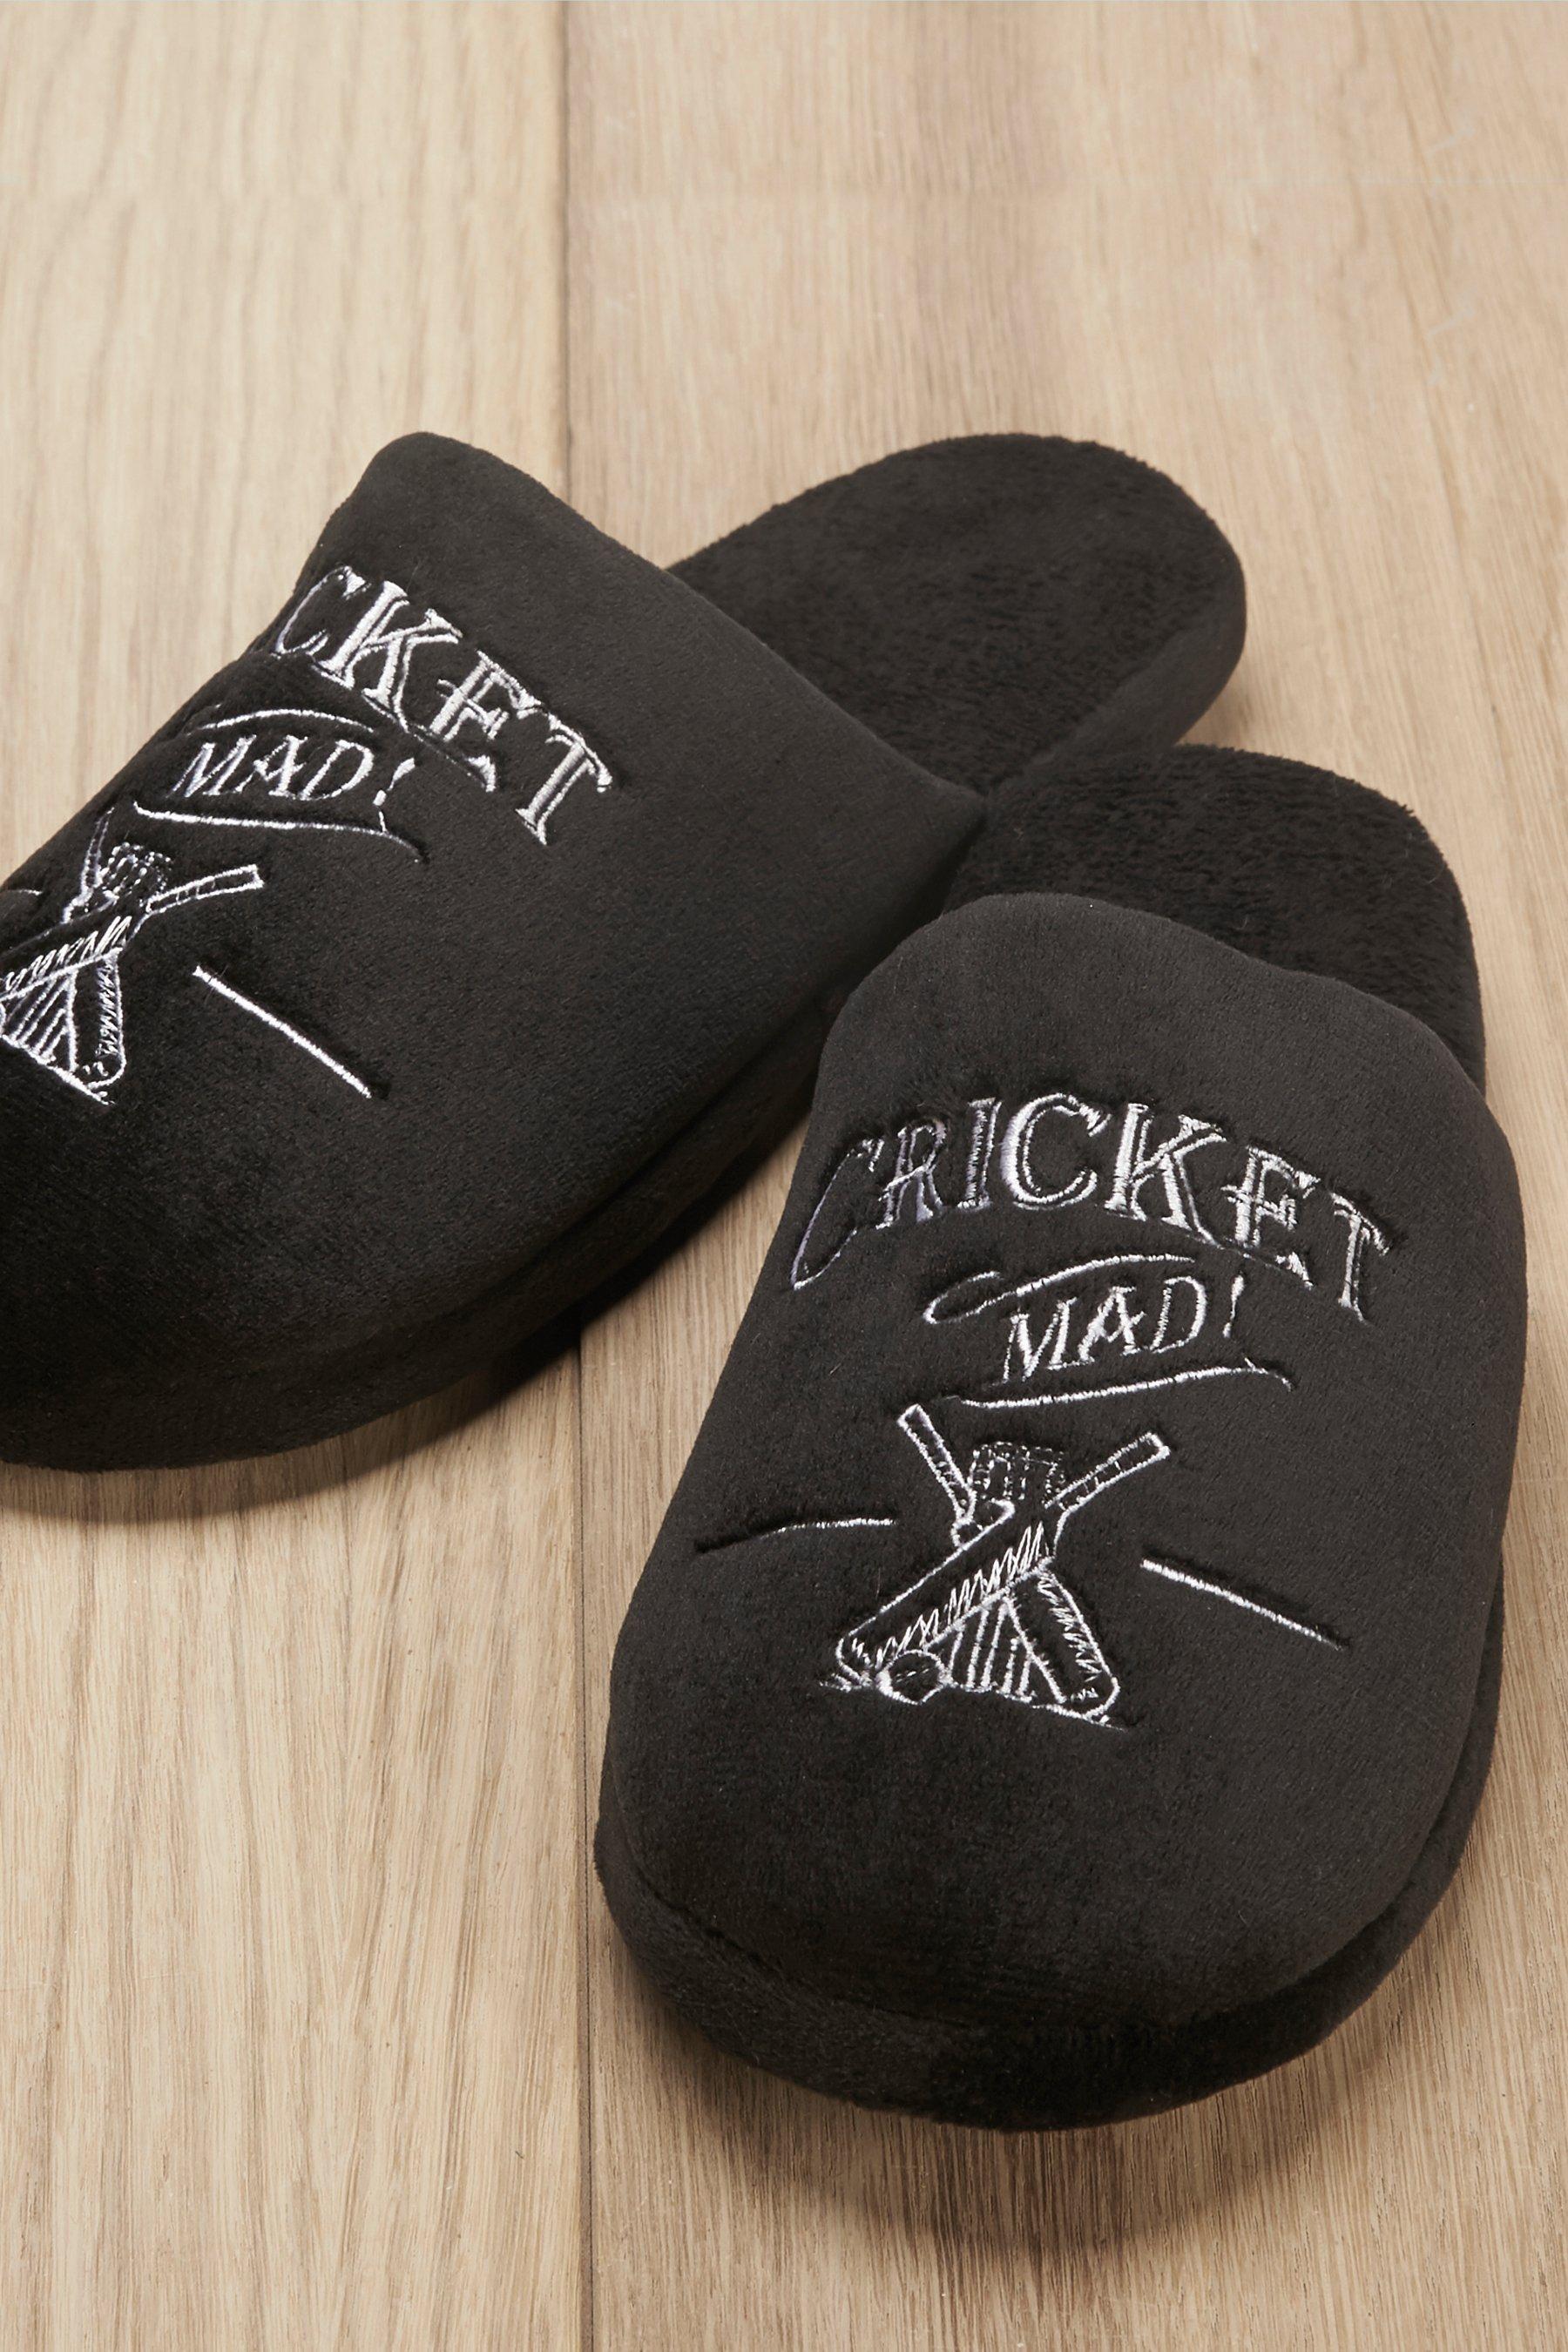 cricket slippers